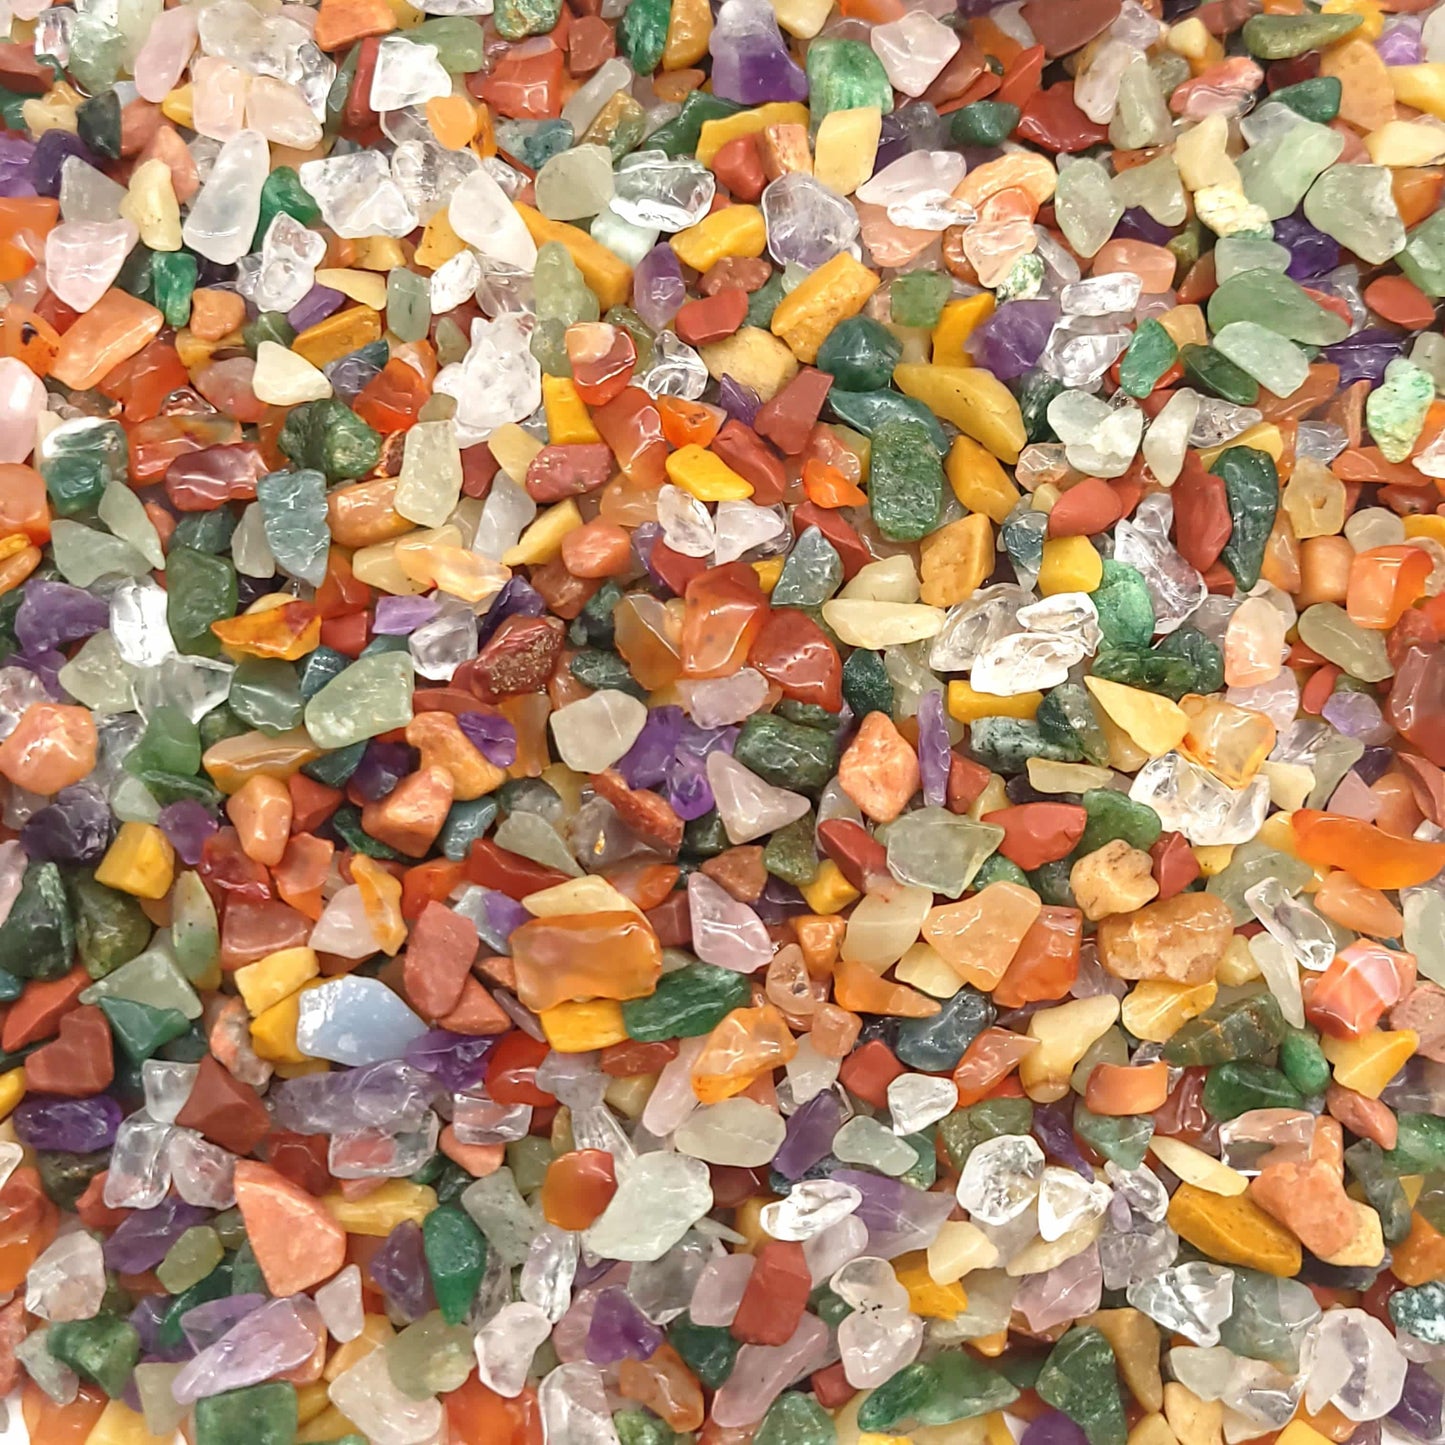 Mixed Stone Tumbled Chips (5-10mm) - 1 LB